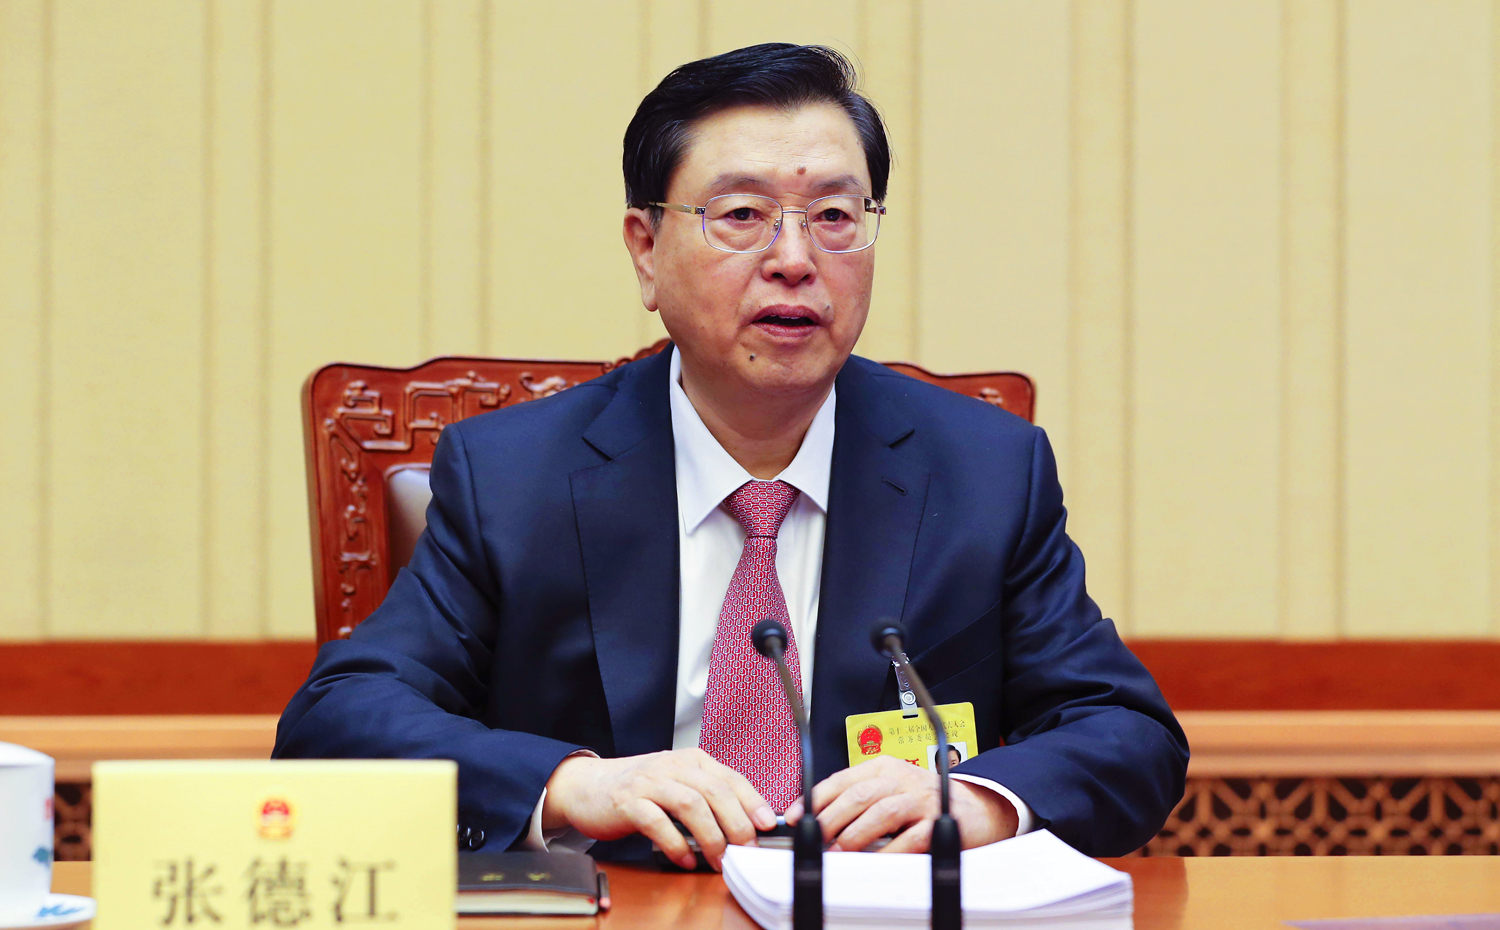 Zhang said the central government's approach would gradually push for democratic development. Photo: Xinhua